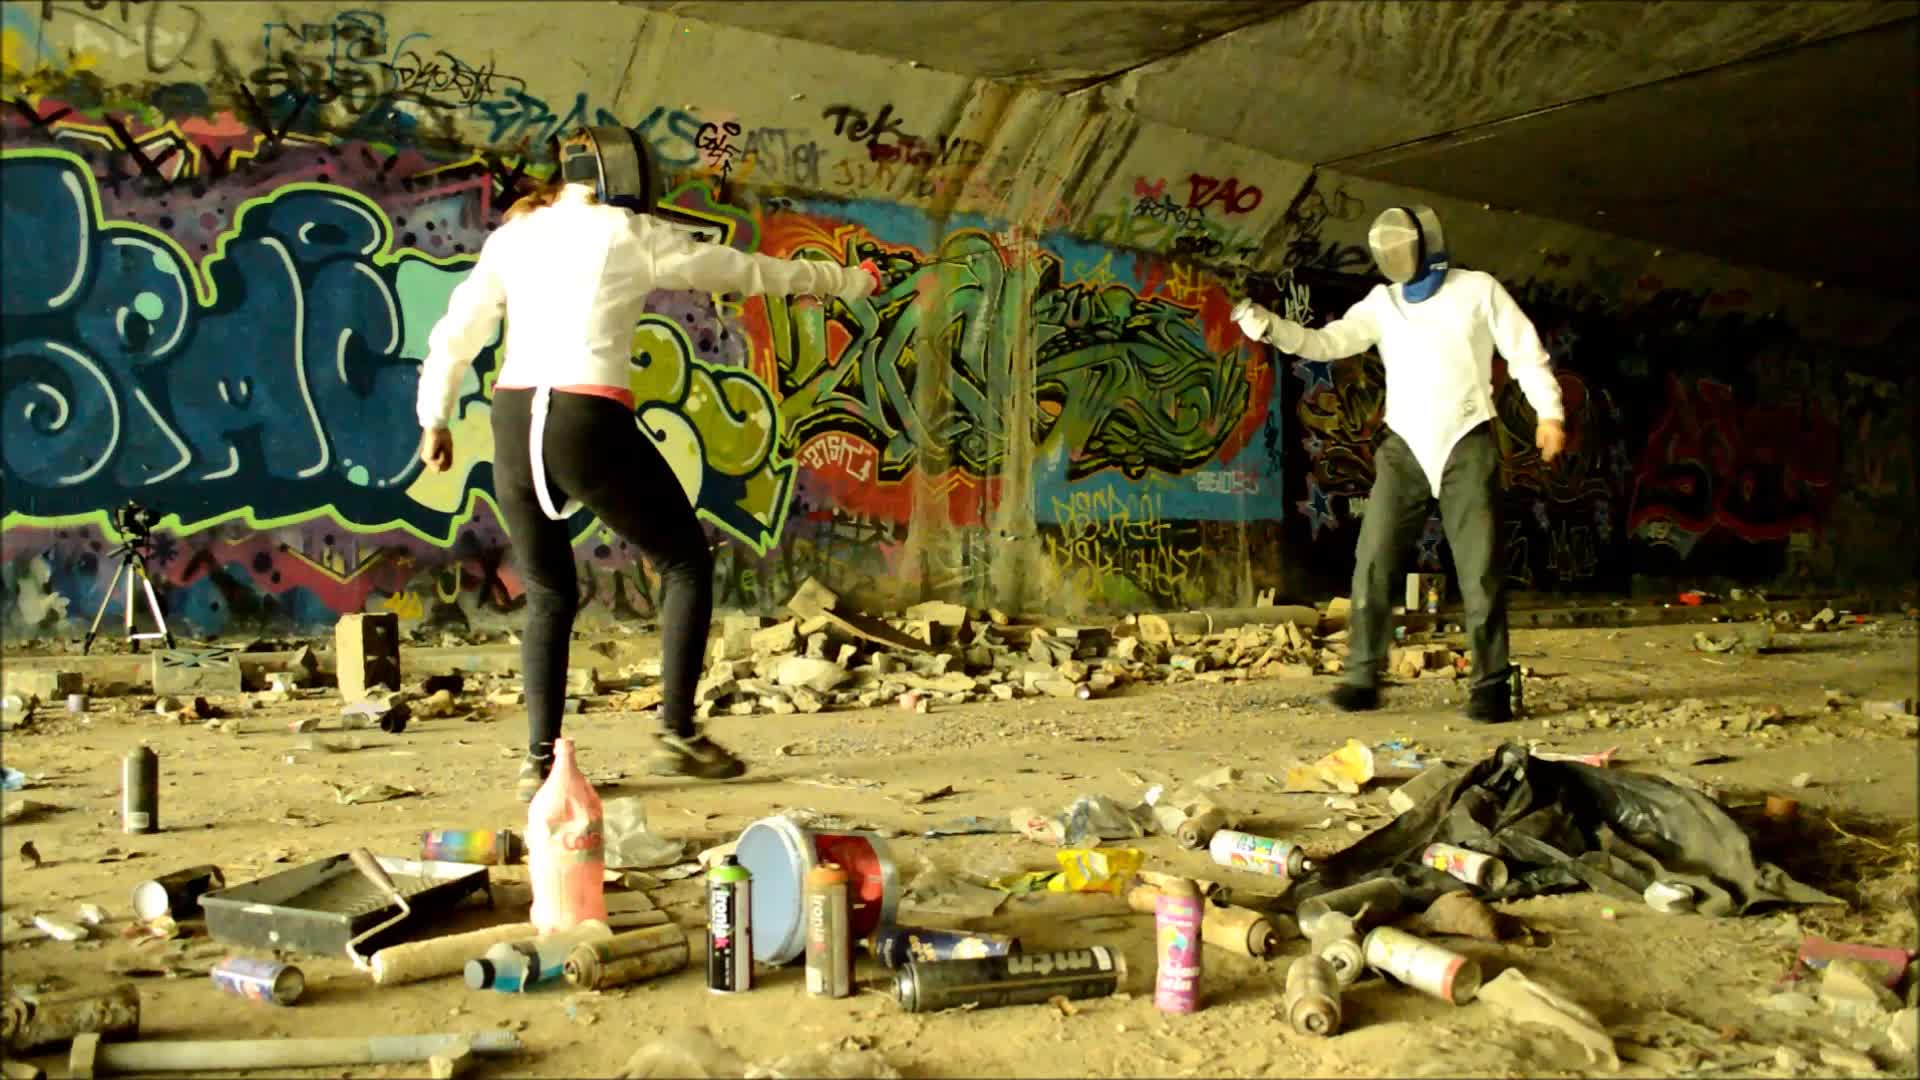 two men are playing with some toys in an abandoned building